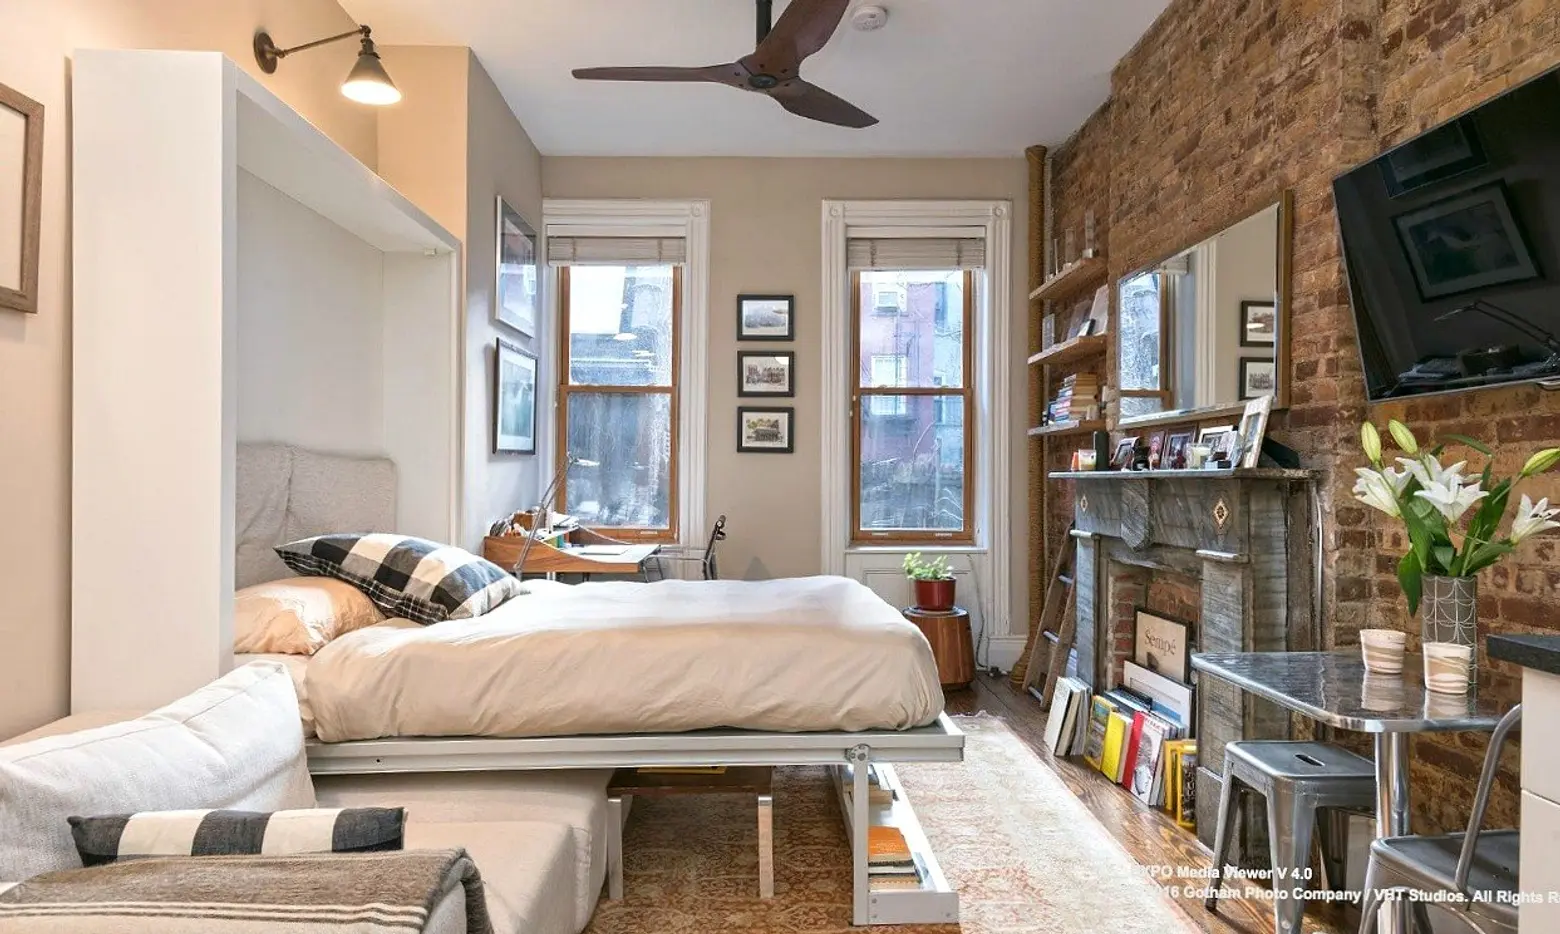 Cozy Greenwich Village studio with Murphy bed is renting for $3,495/month